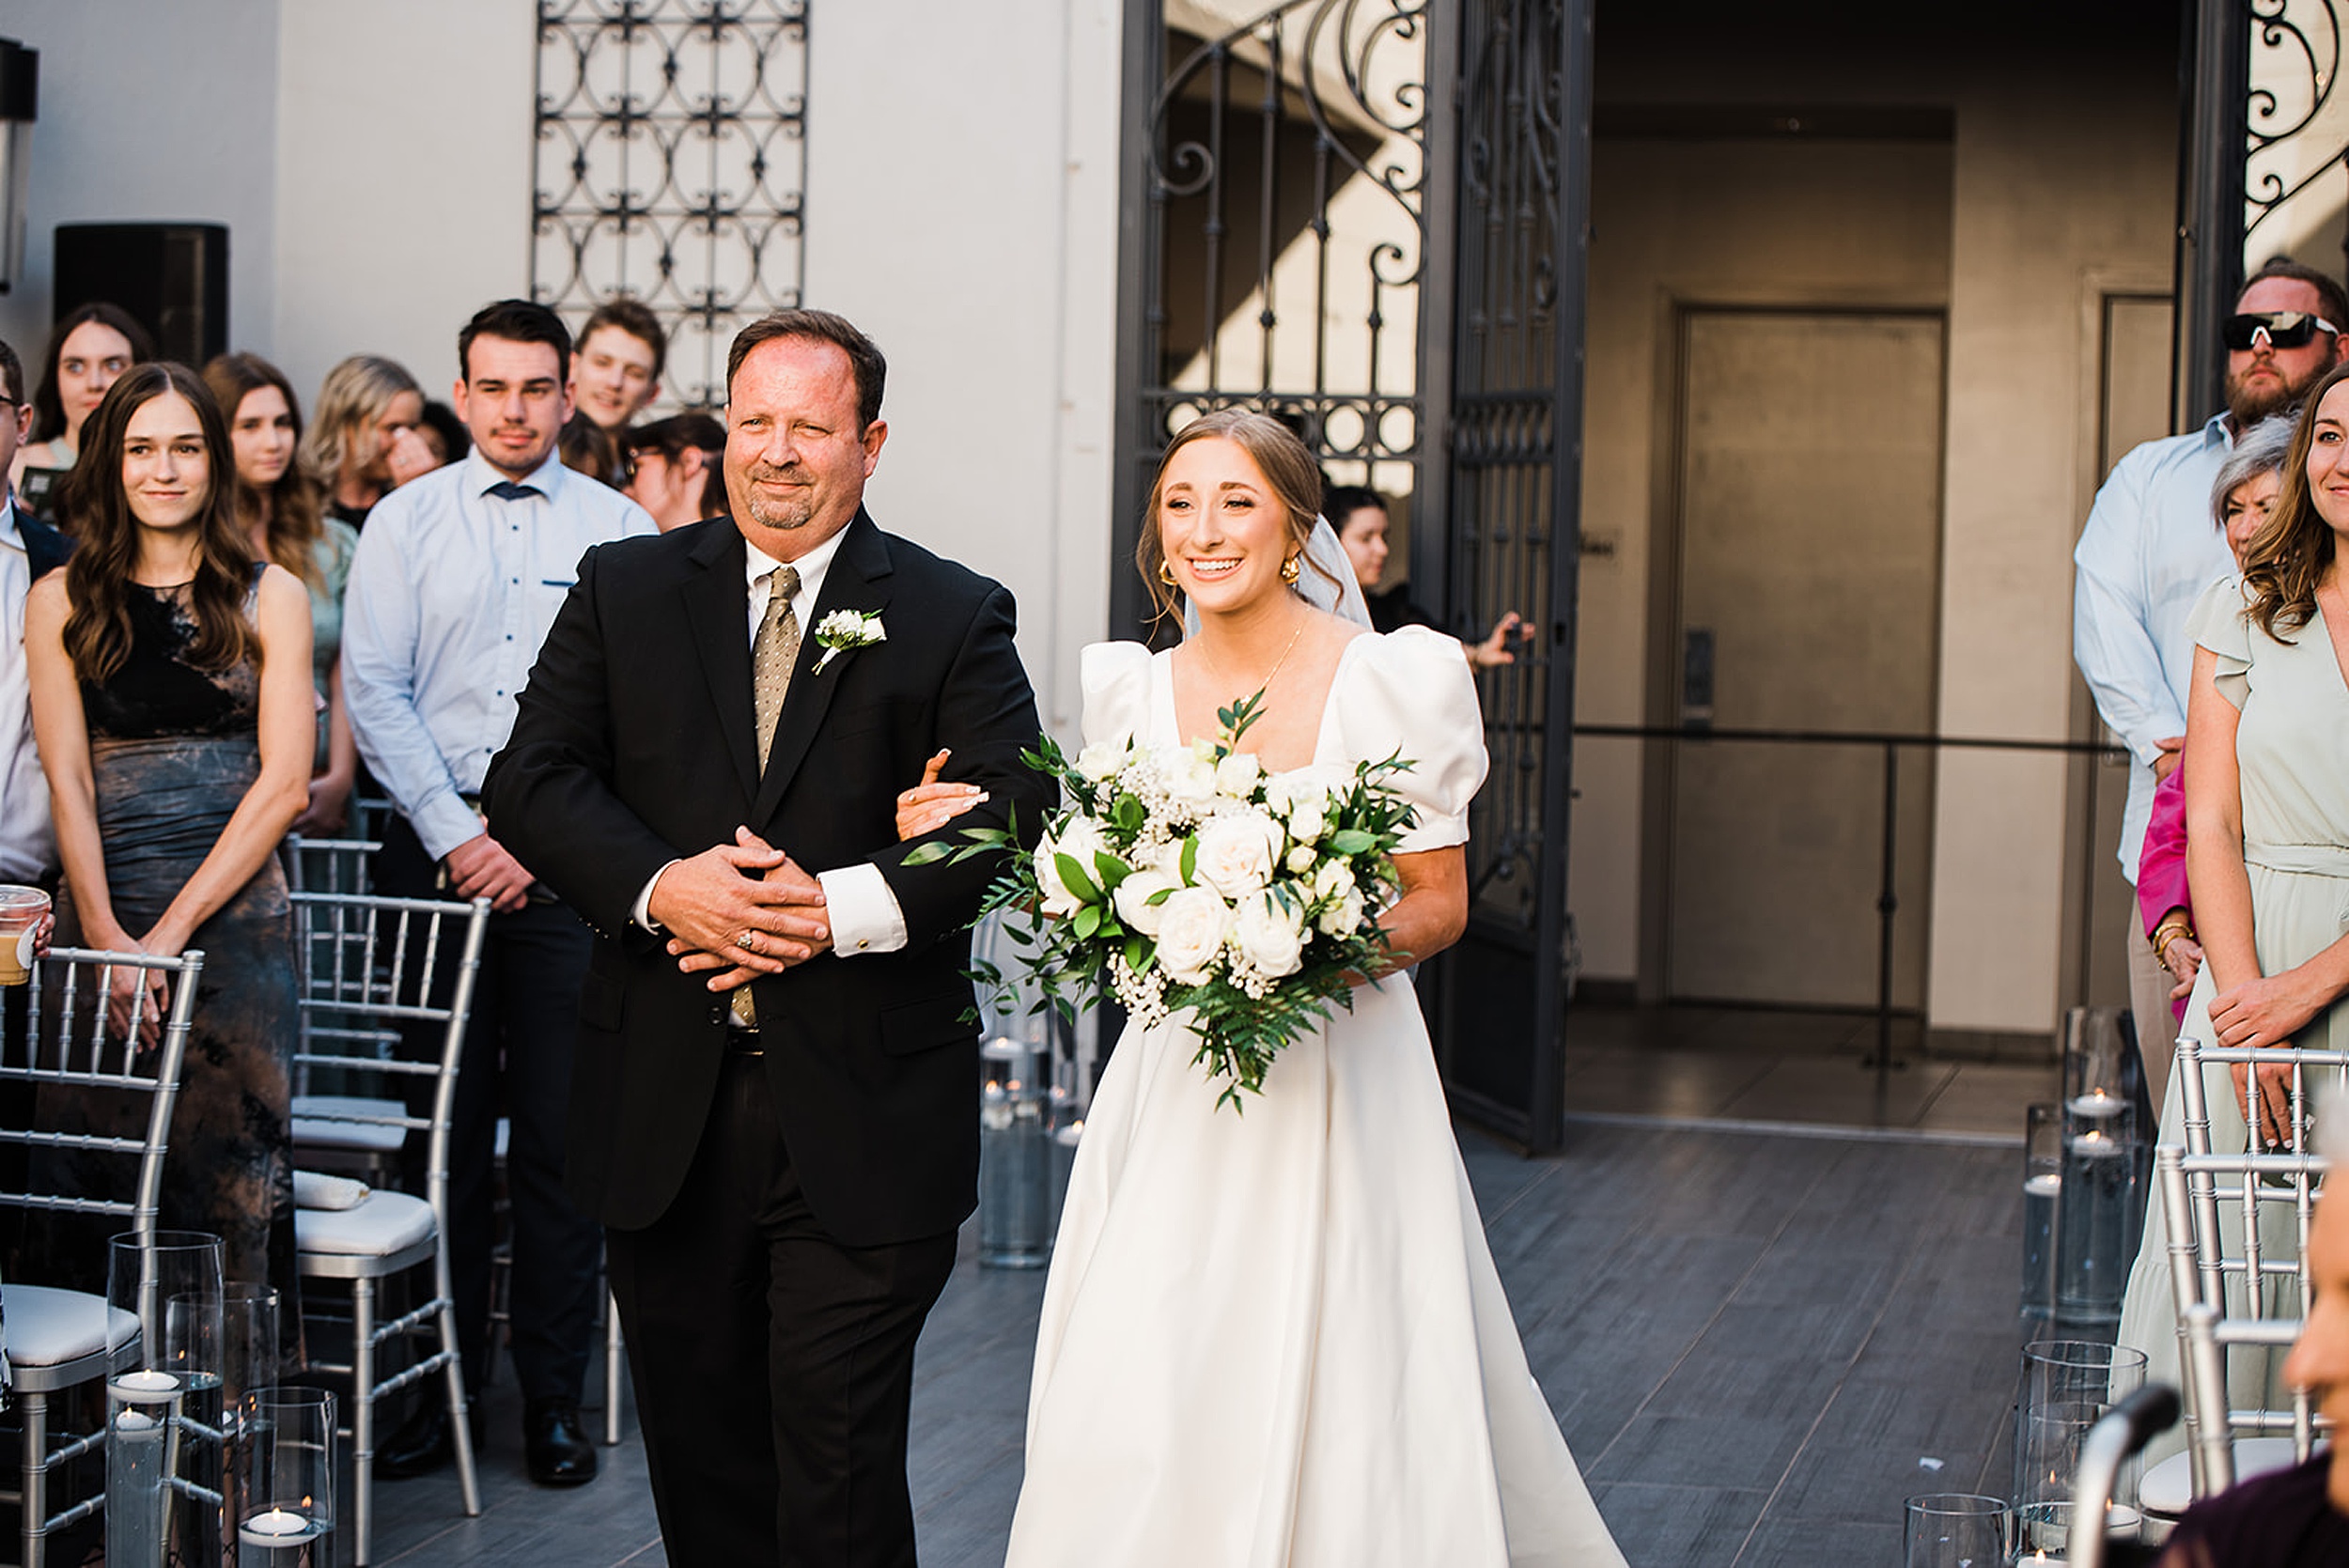 A father in a black suit walks his daughter down the aisl in a white silk wedding dress